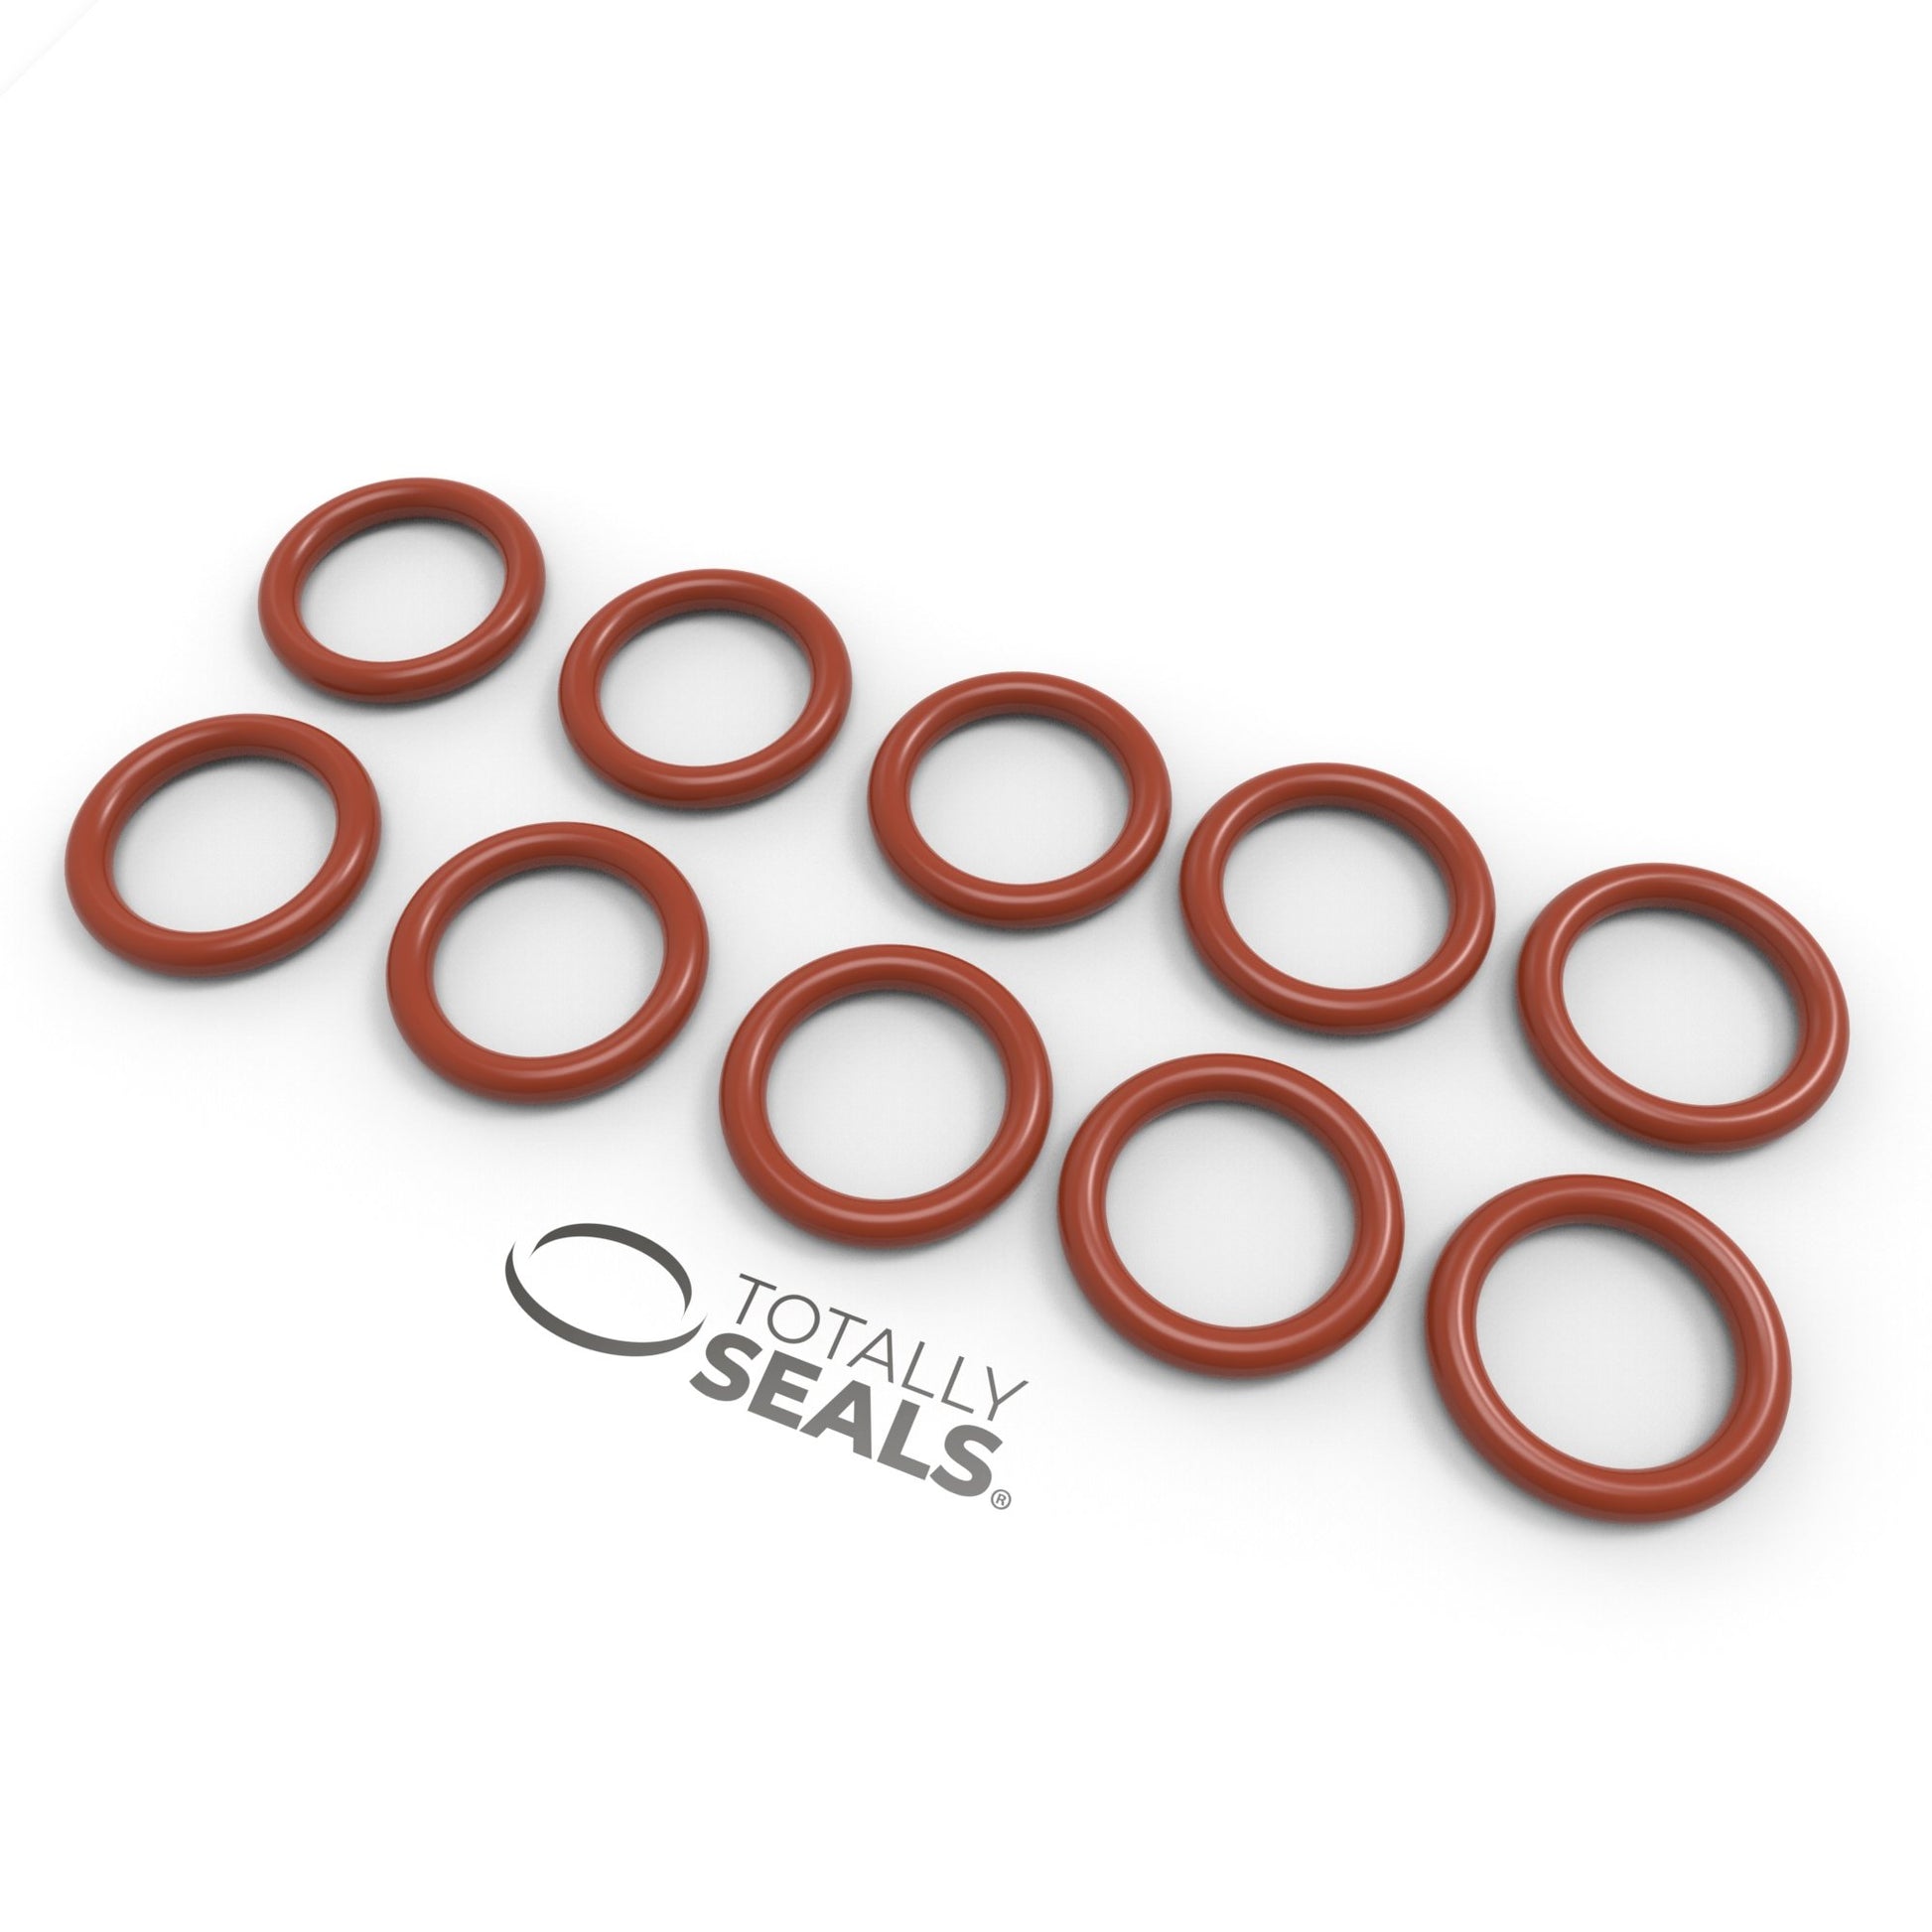 19mm x 3mm (25mm OD) Silicone O-Rings - Totally Seals®